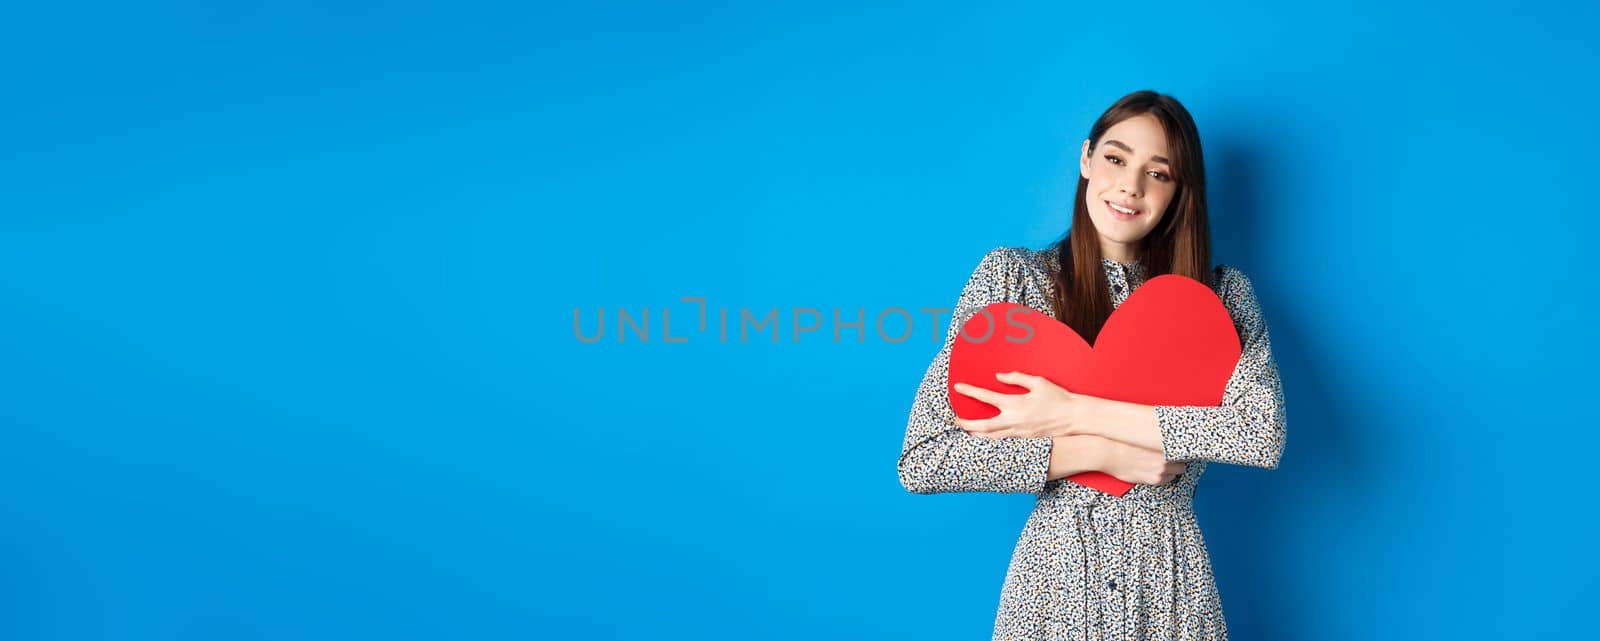 Valentines day. Dreamy romantic woman hugging big red heart cutout, looking sensual at camera, standing in dress on blue background.